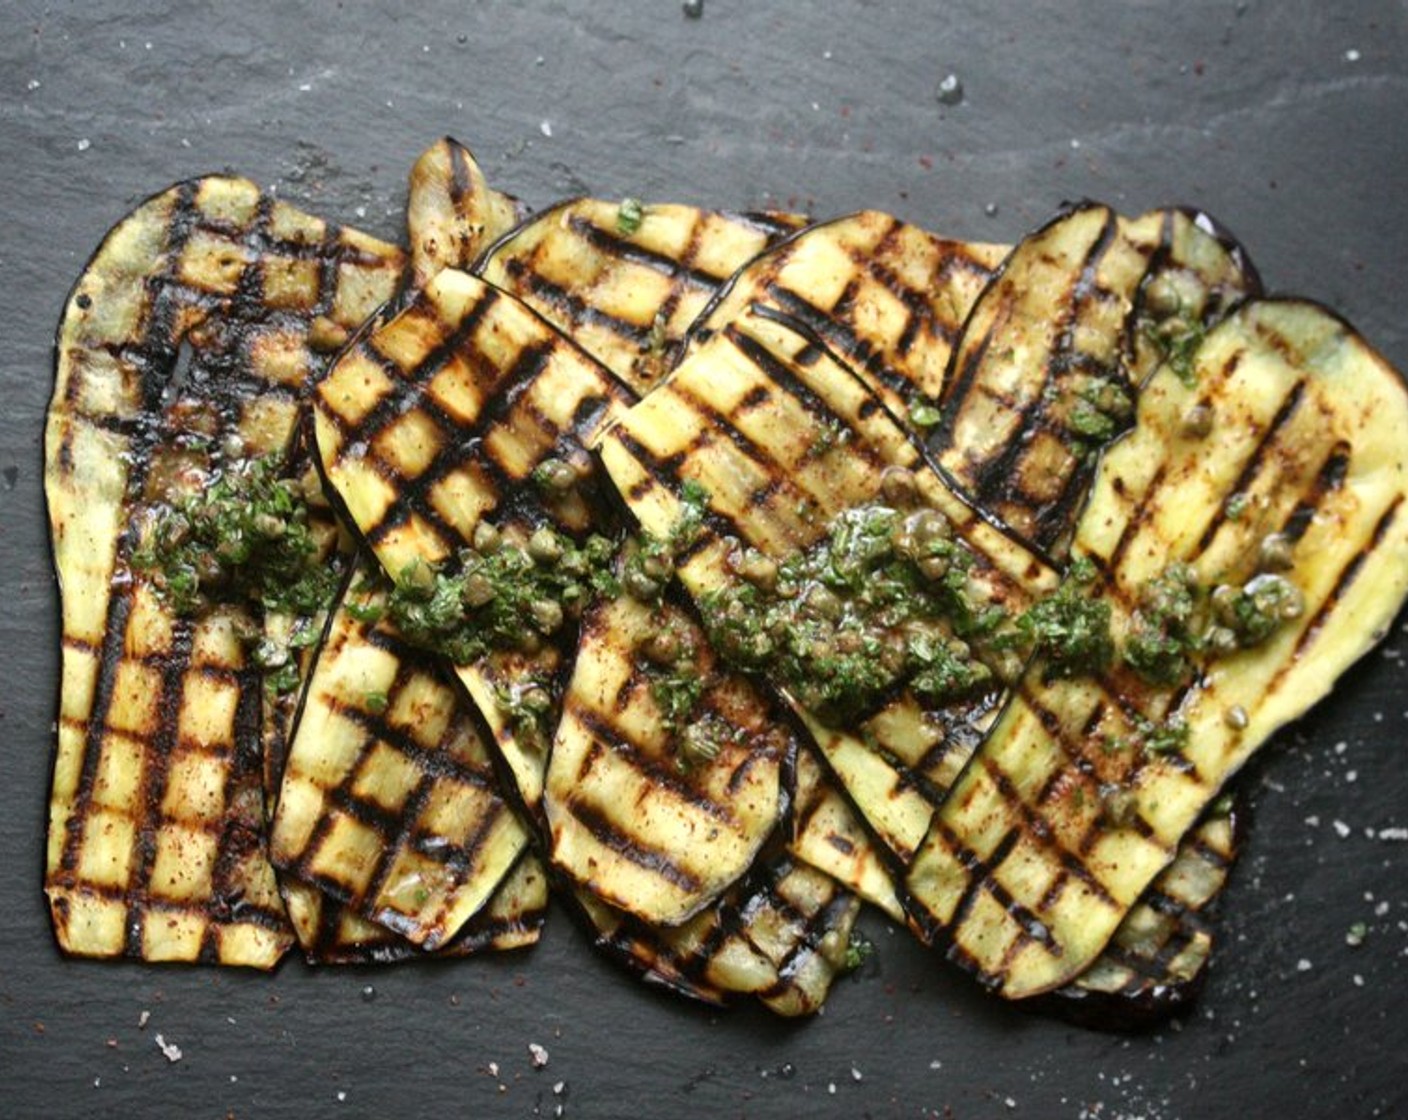 Grilled Eggplant with Sumac, Capers, and Mint